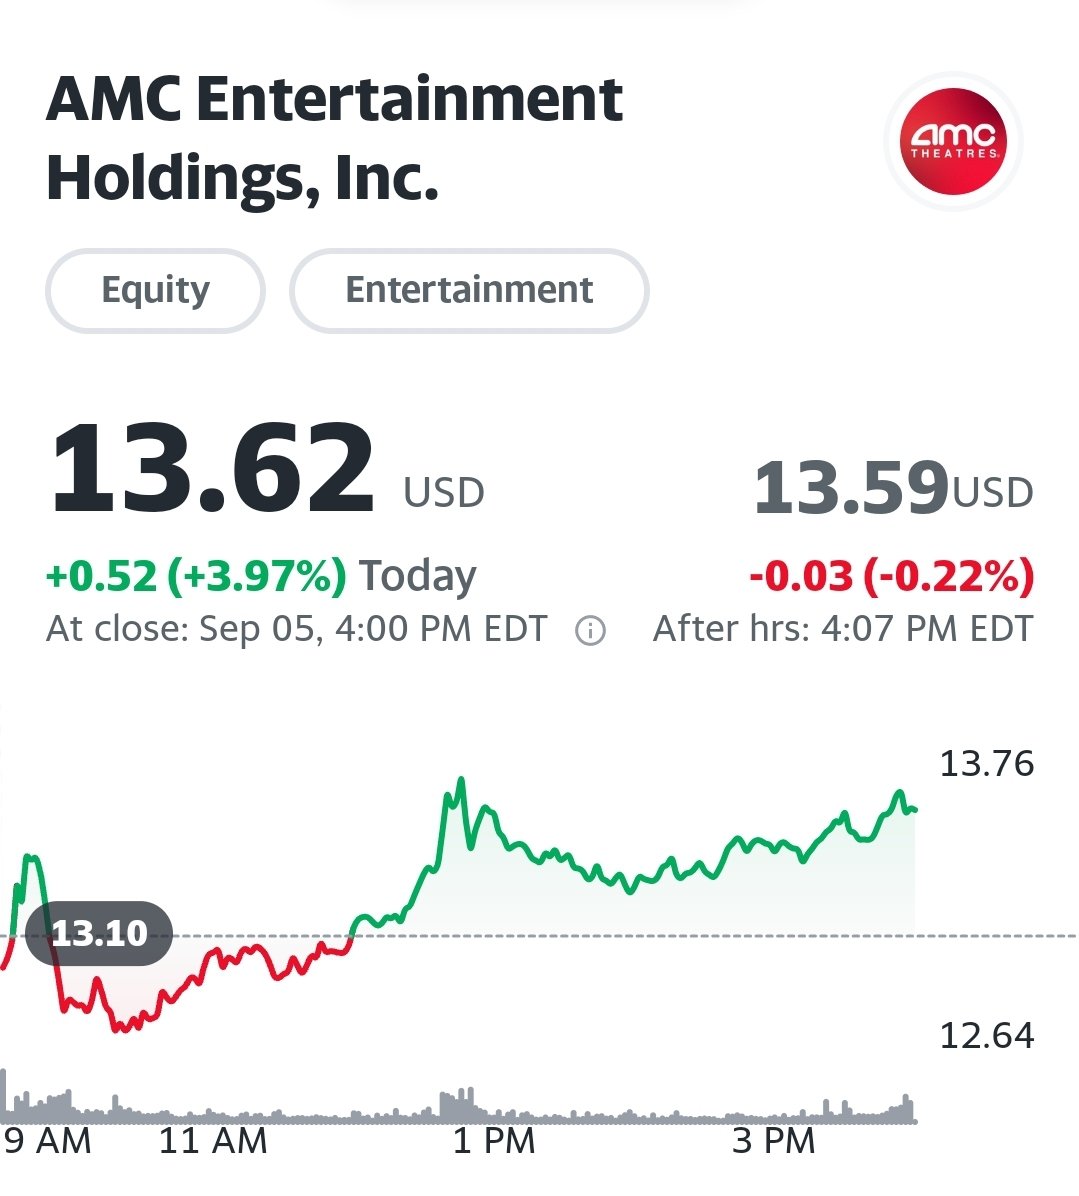 We Close the Day At #Amc $13.62 With 19.65 in Volume #OurStonk #GorillaGang #APESNOTLEAVING If You Know This Game..Your #HoldingTheLine 💎🙌🏾🦍🦍🦍🦍